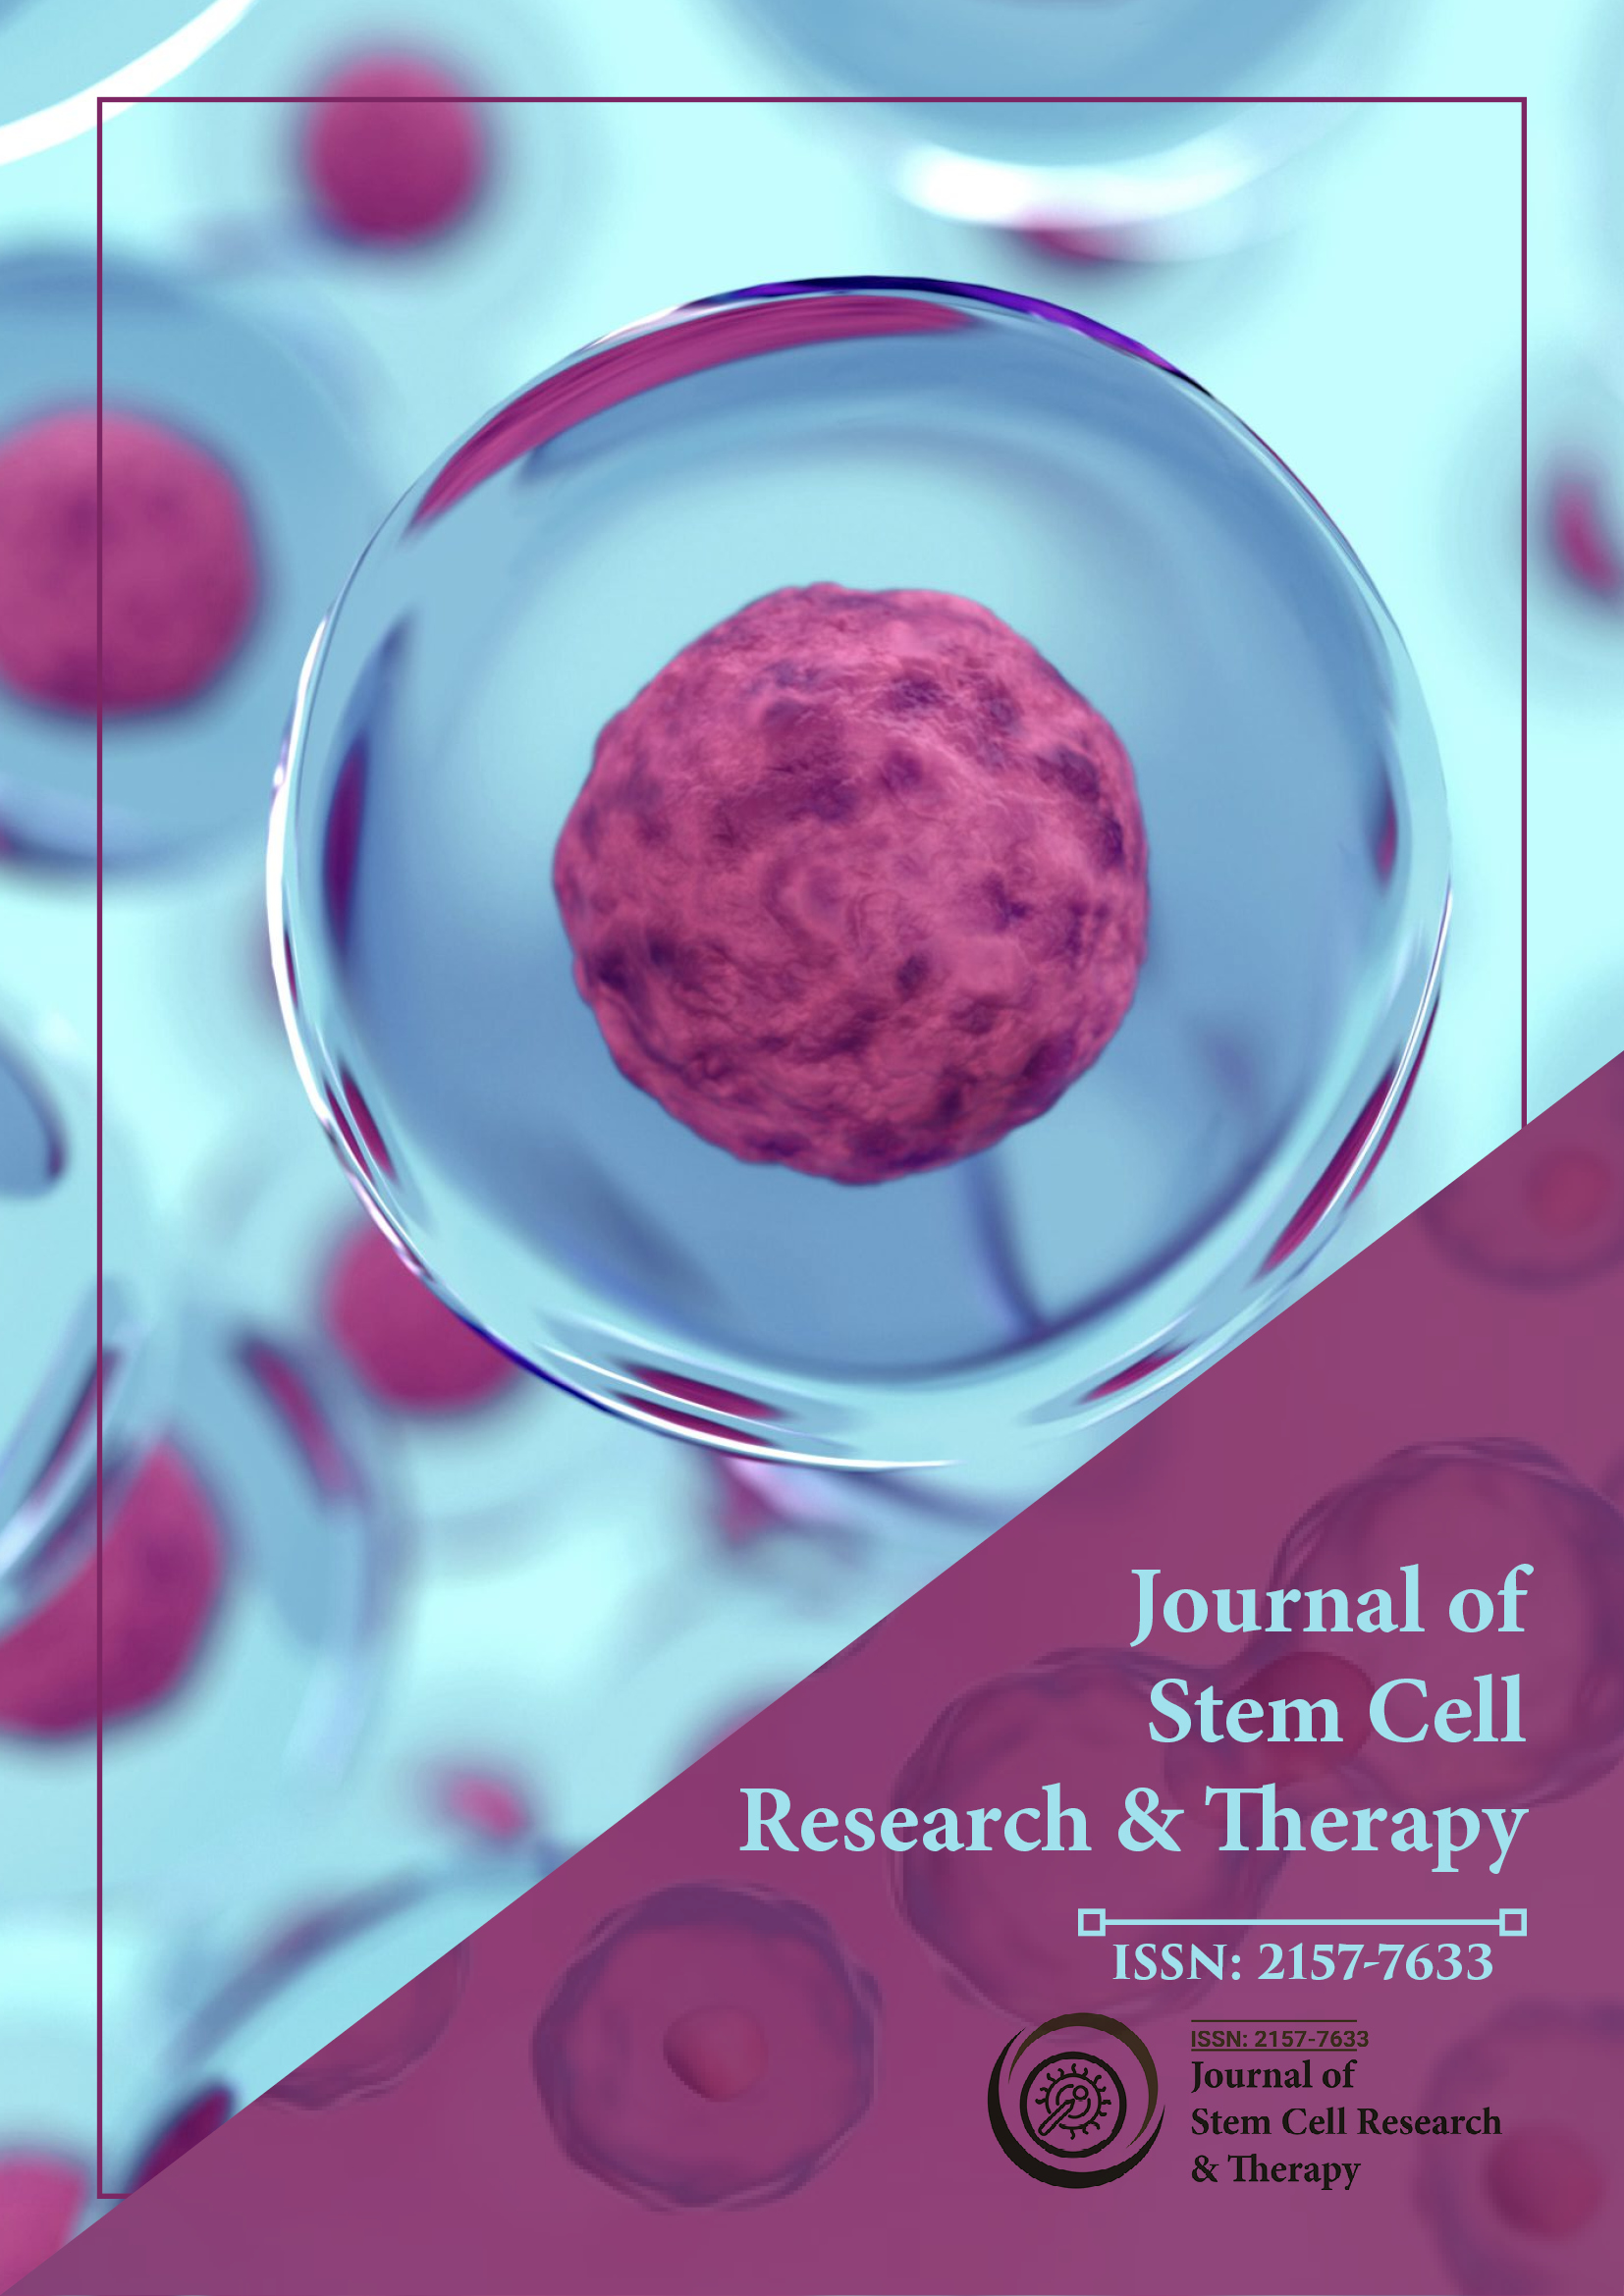 Journal of Stem Cell Research & Therapy